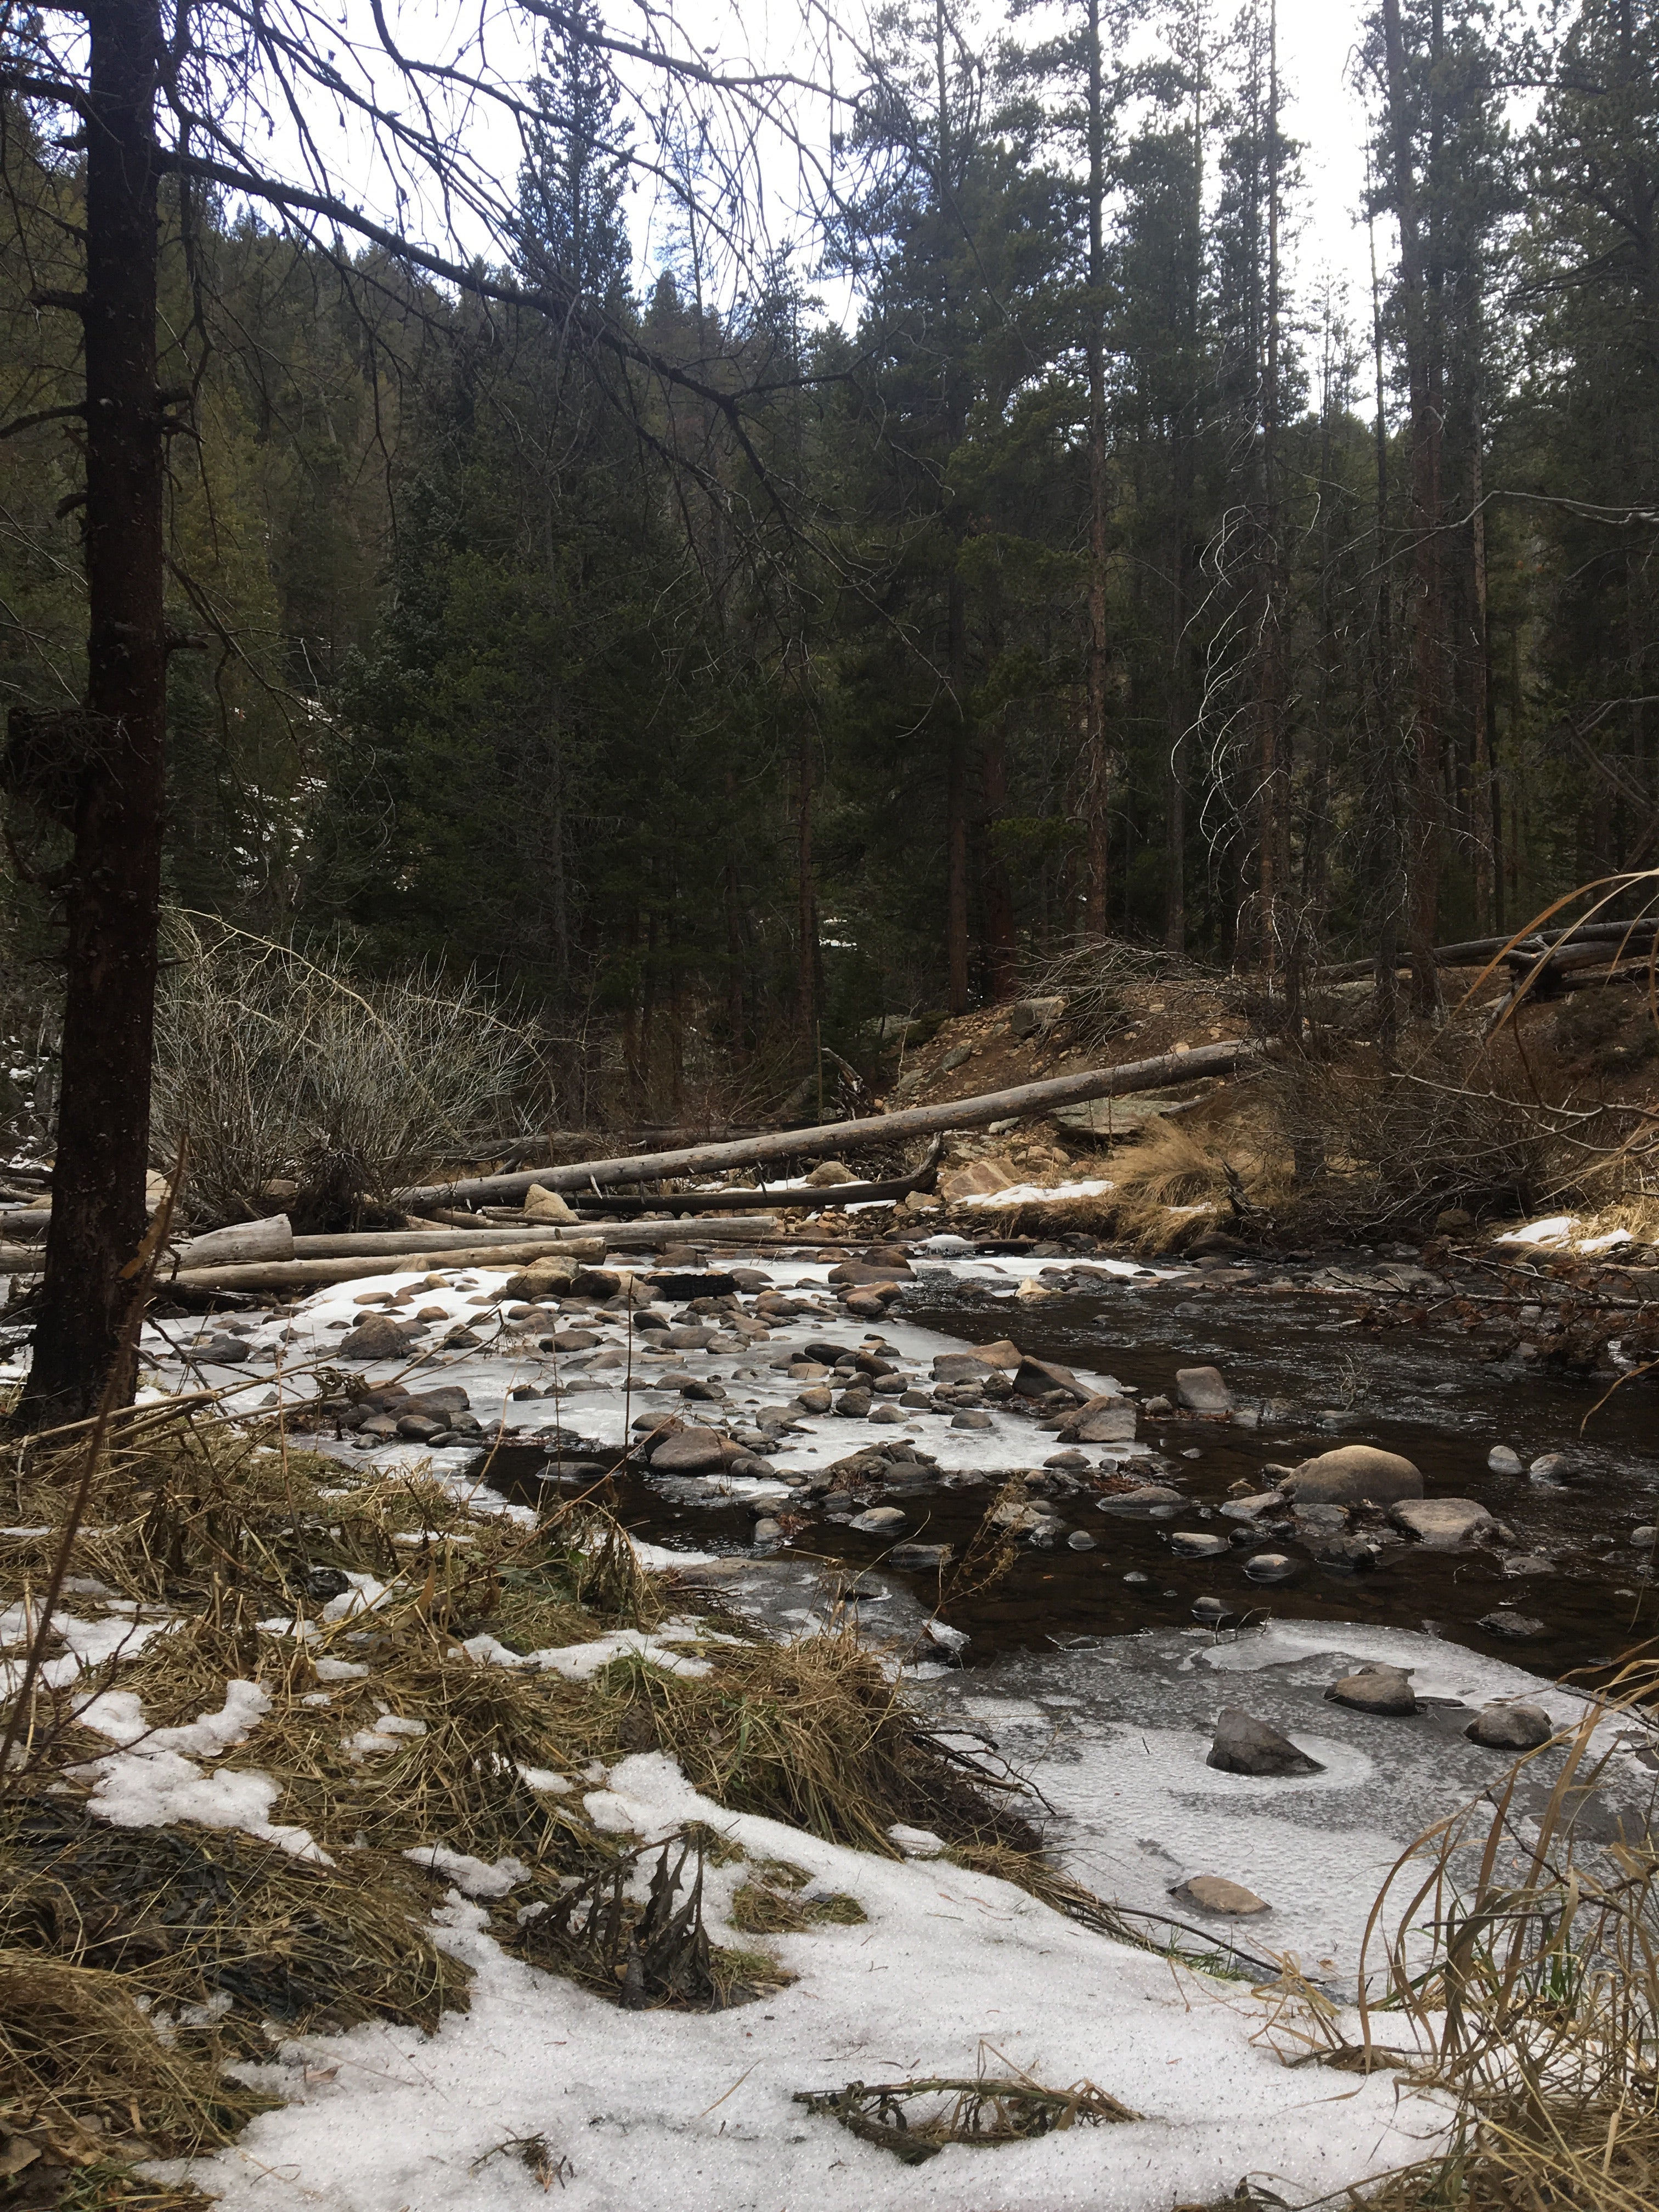 Camper submitted image from Ceran St. Vrain Trail Dispersed Camping - 2